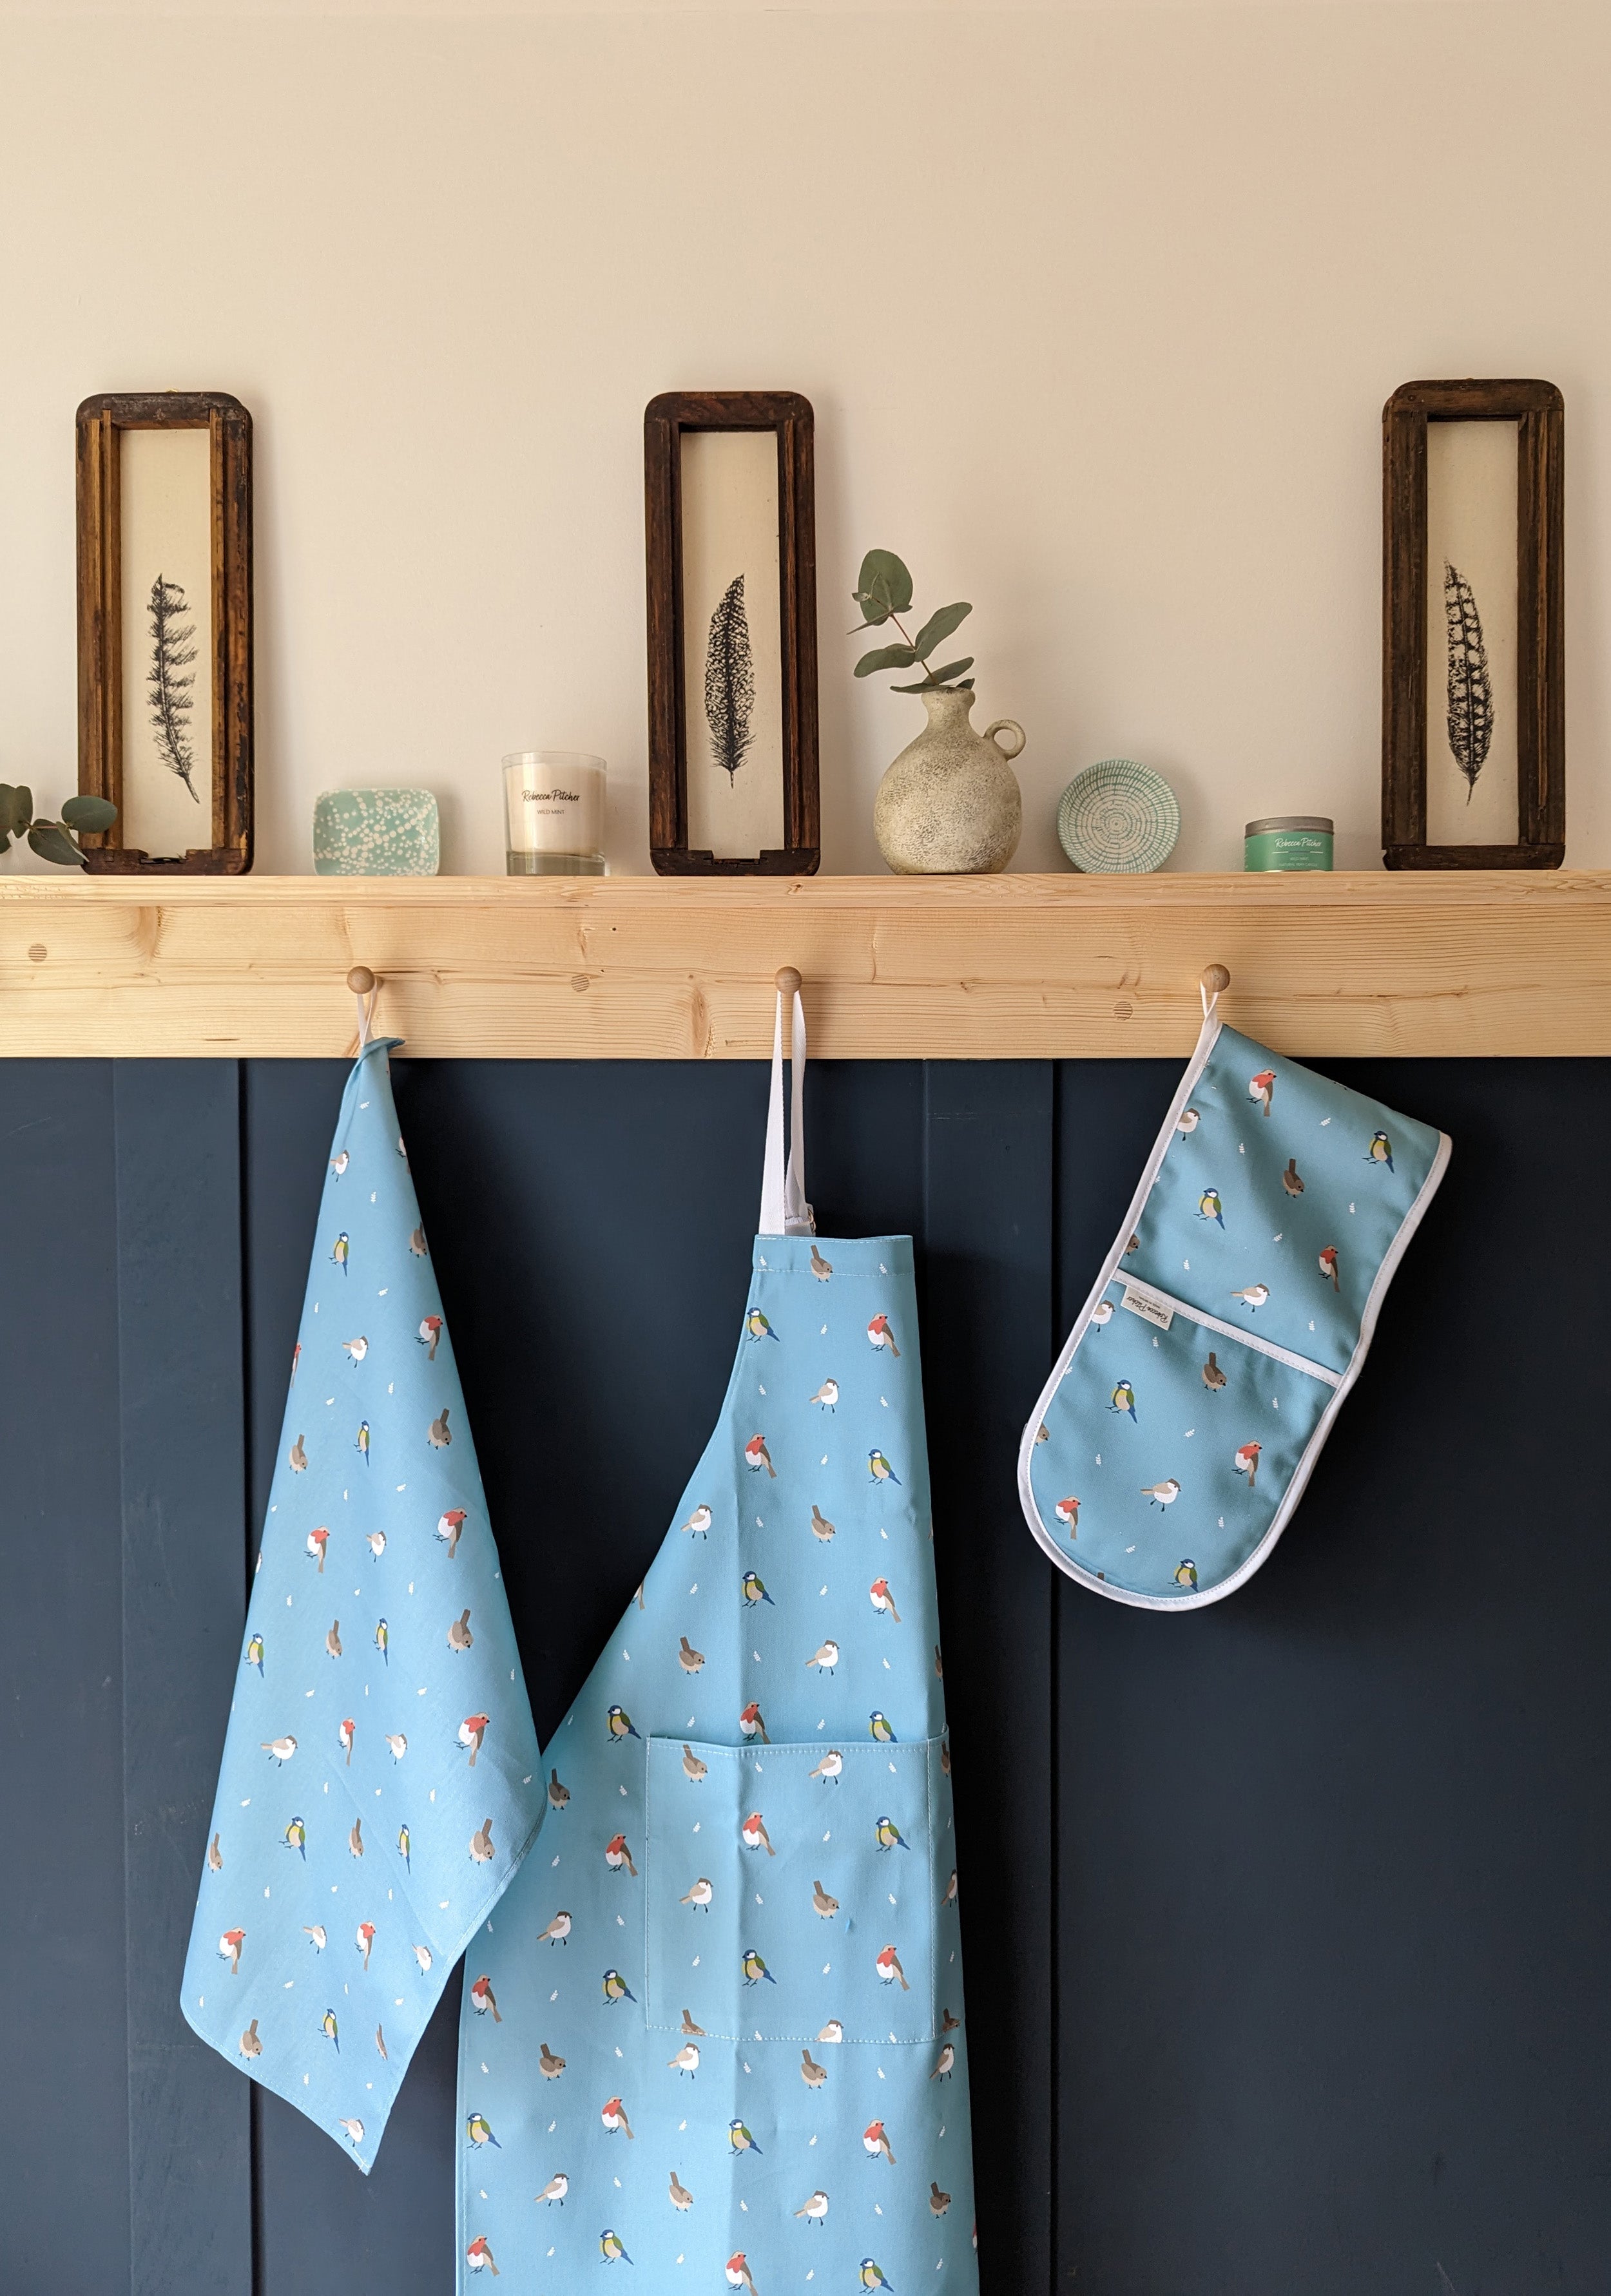 Teal Cotton Apron tea towels and oven gloves with garden bird illustrations